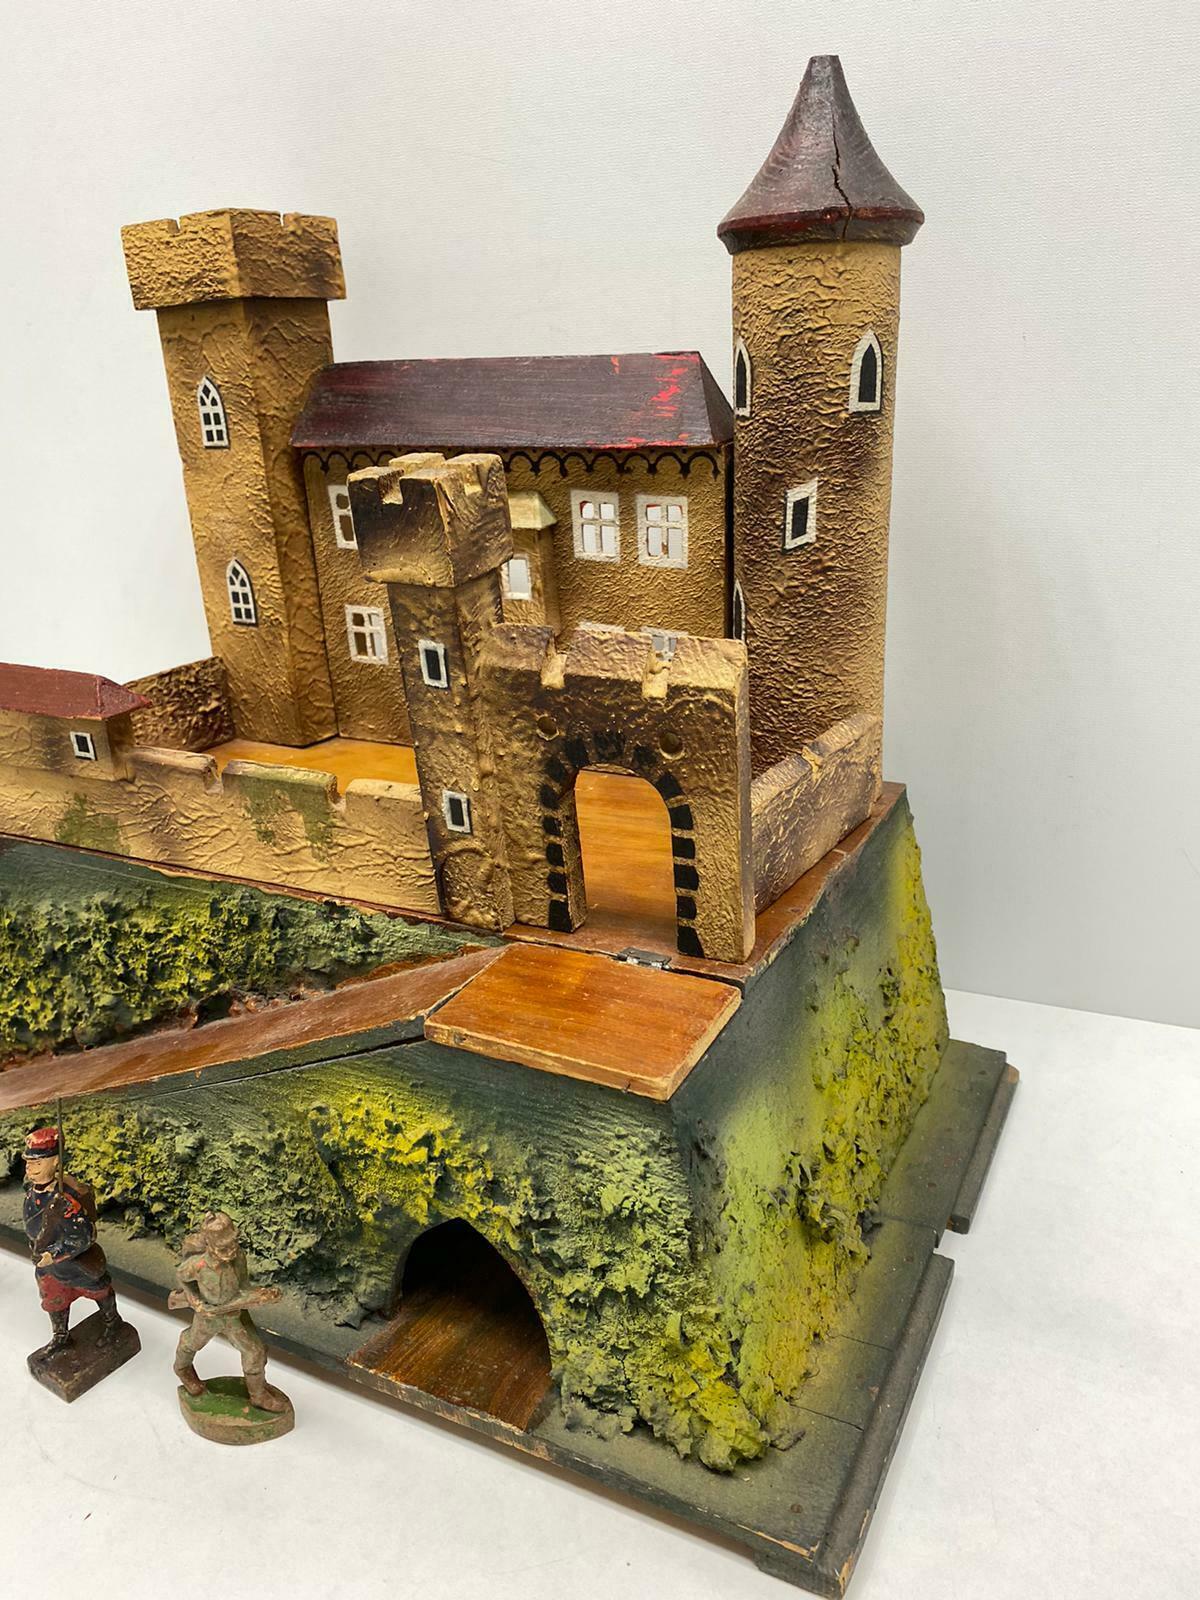 Offered is an absolutely stunning toy castle, it is a beautiful example of early 20th century, German handmade craft. The architectural detailing in the crenellated towers and torches flanking the staircase as well as the hand painted details make